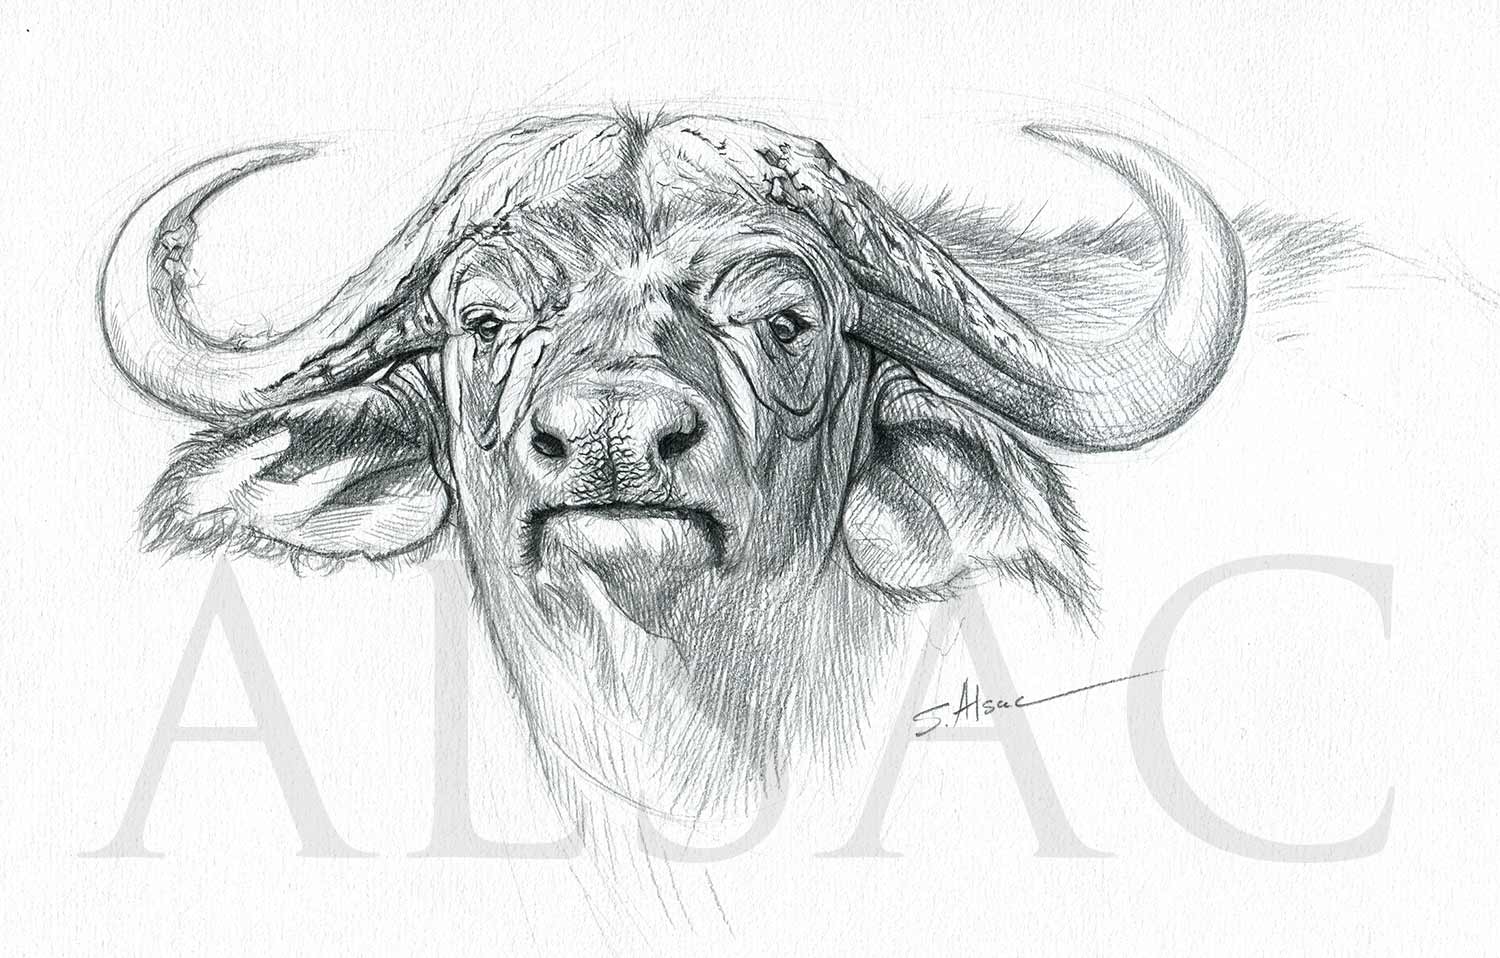 Buffalo Sketch Photographic Prints for Sale  Redbubble